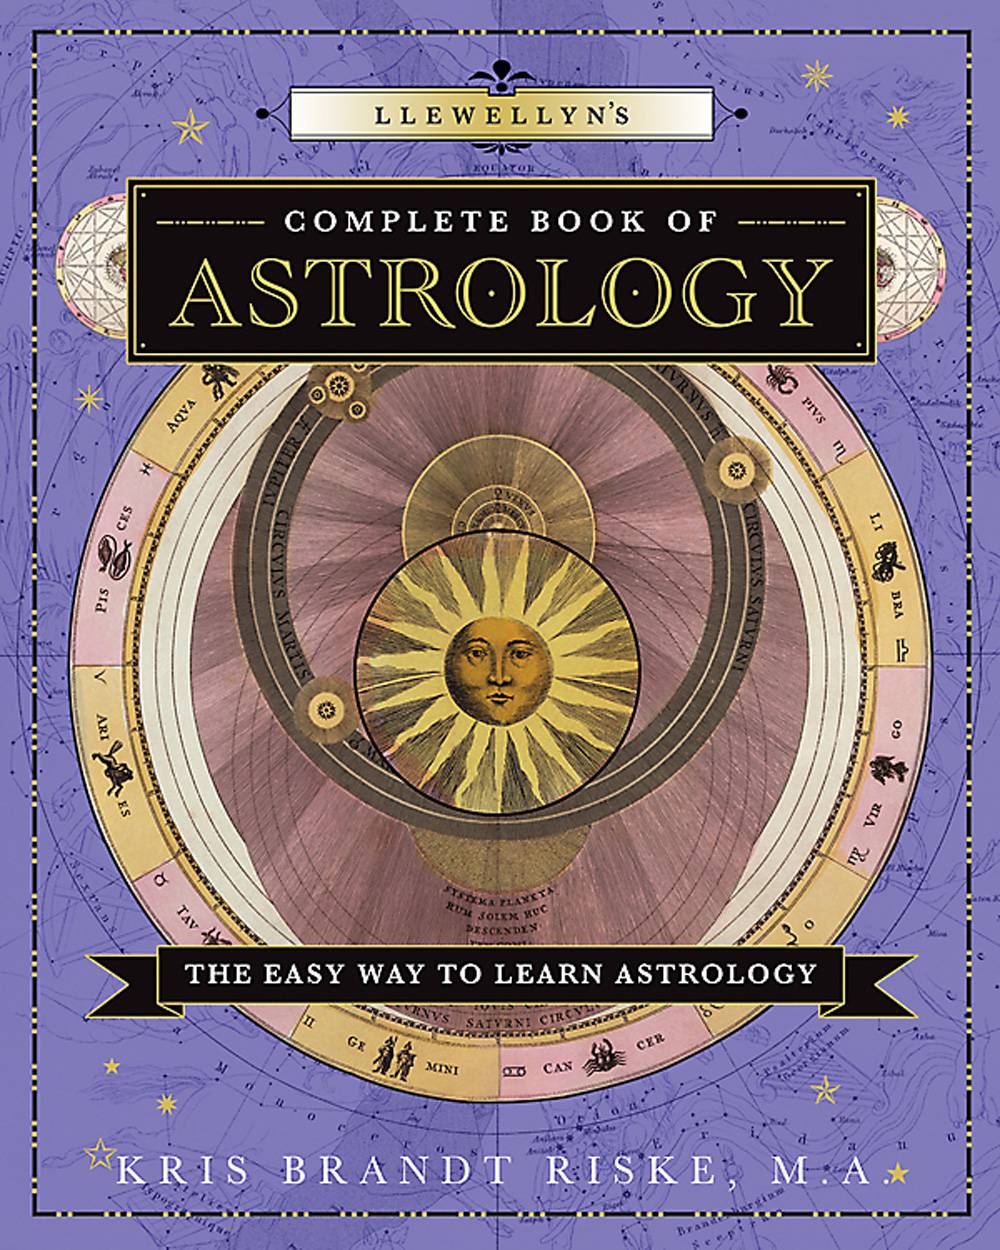 Llewellyns complete book of astrology - a beginners guide